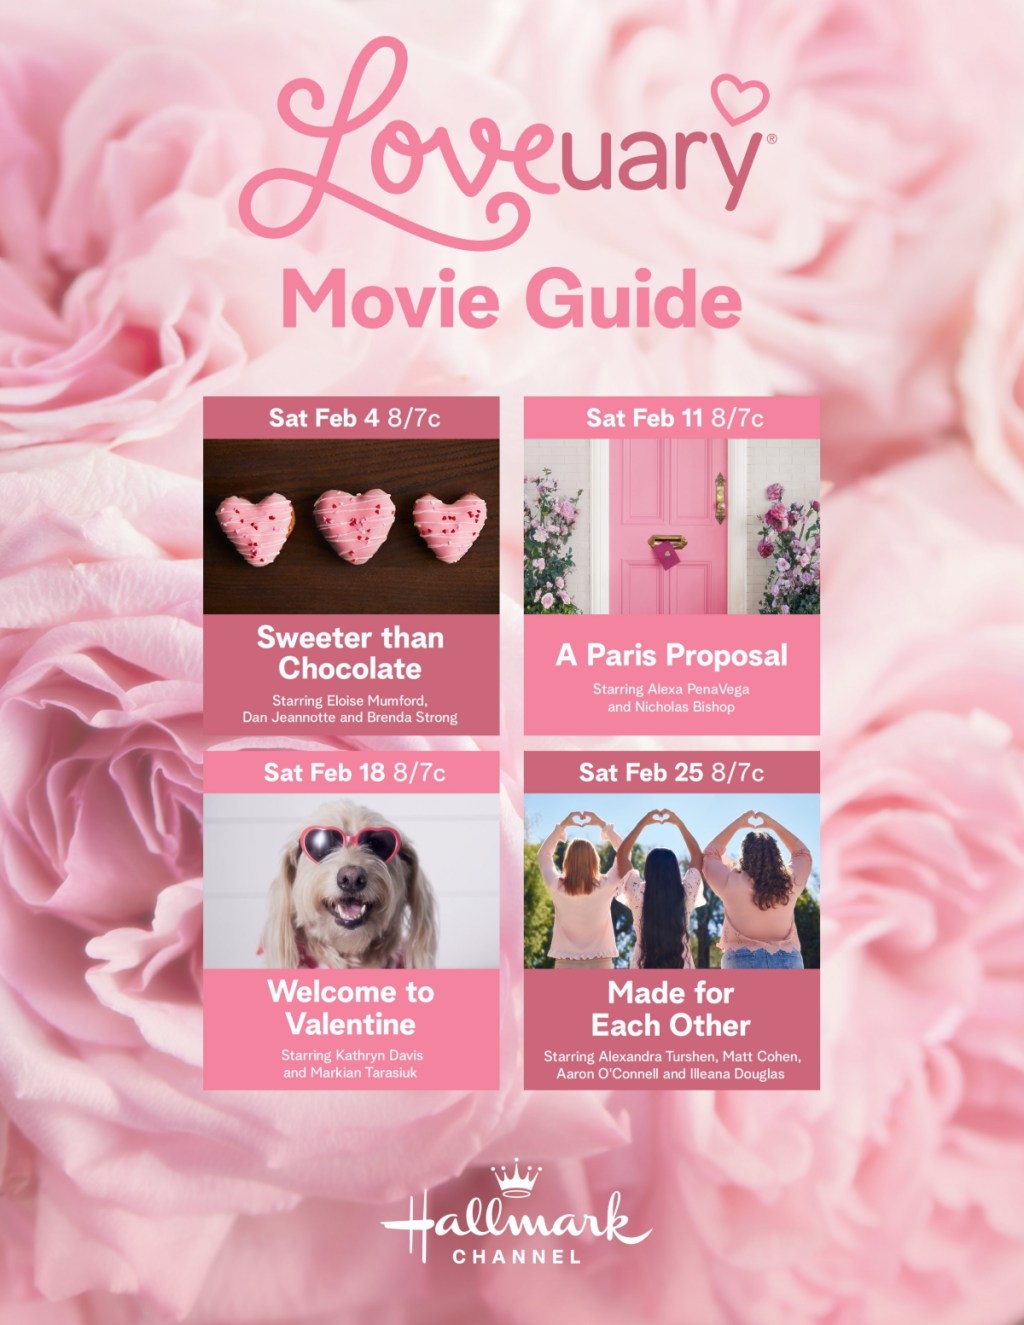 Hallmark's Loveuary movie guide, showing title cards for four different romantic comedies